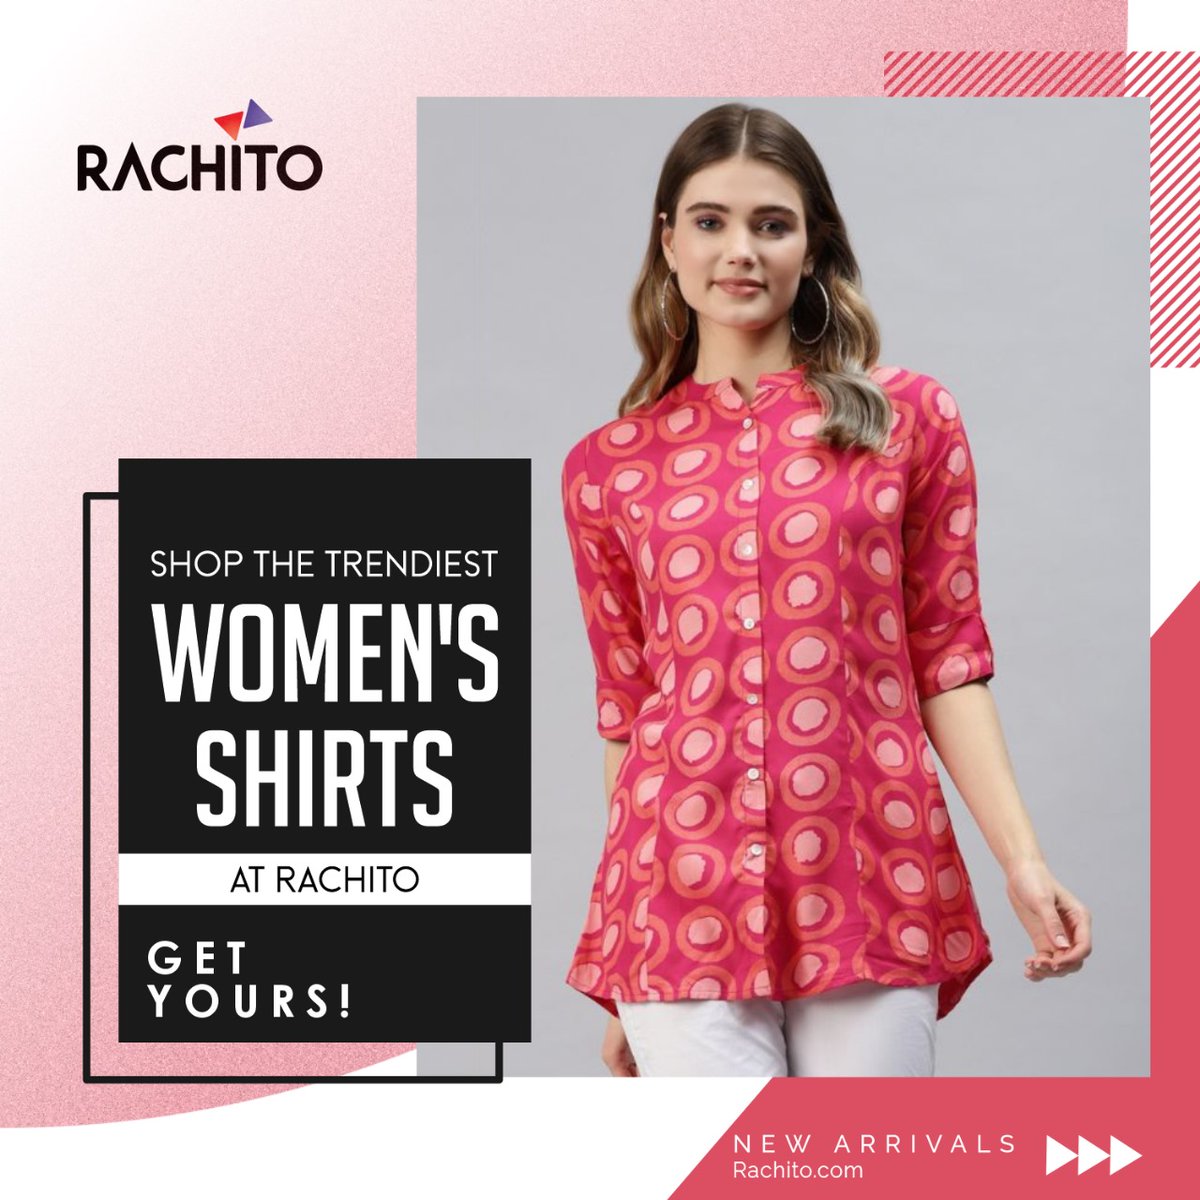 😍Experience quality and👗fashion with Rachito's women's shirts. Get yours today
--->
Shop Now🛍️ :- rachito.com
--->
#RACHITO #womensshirts #qualityandstyle #ElevateYourWardrobe #fashionforward #musthave #TrendyThreads #chicstyle #womensfashion #getyourstoday